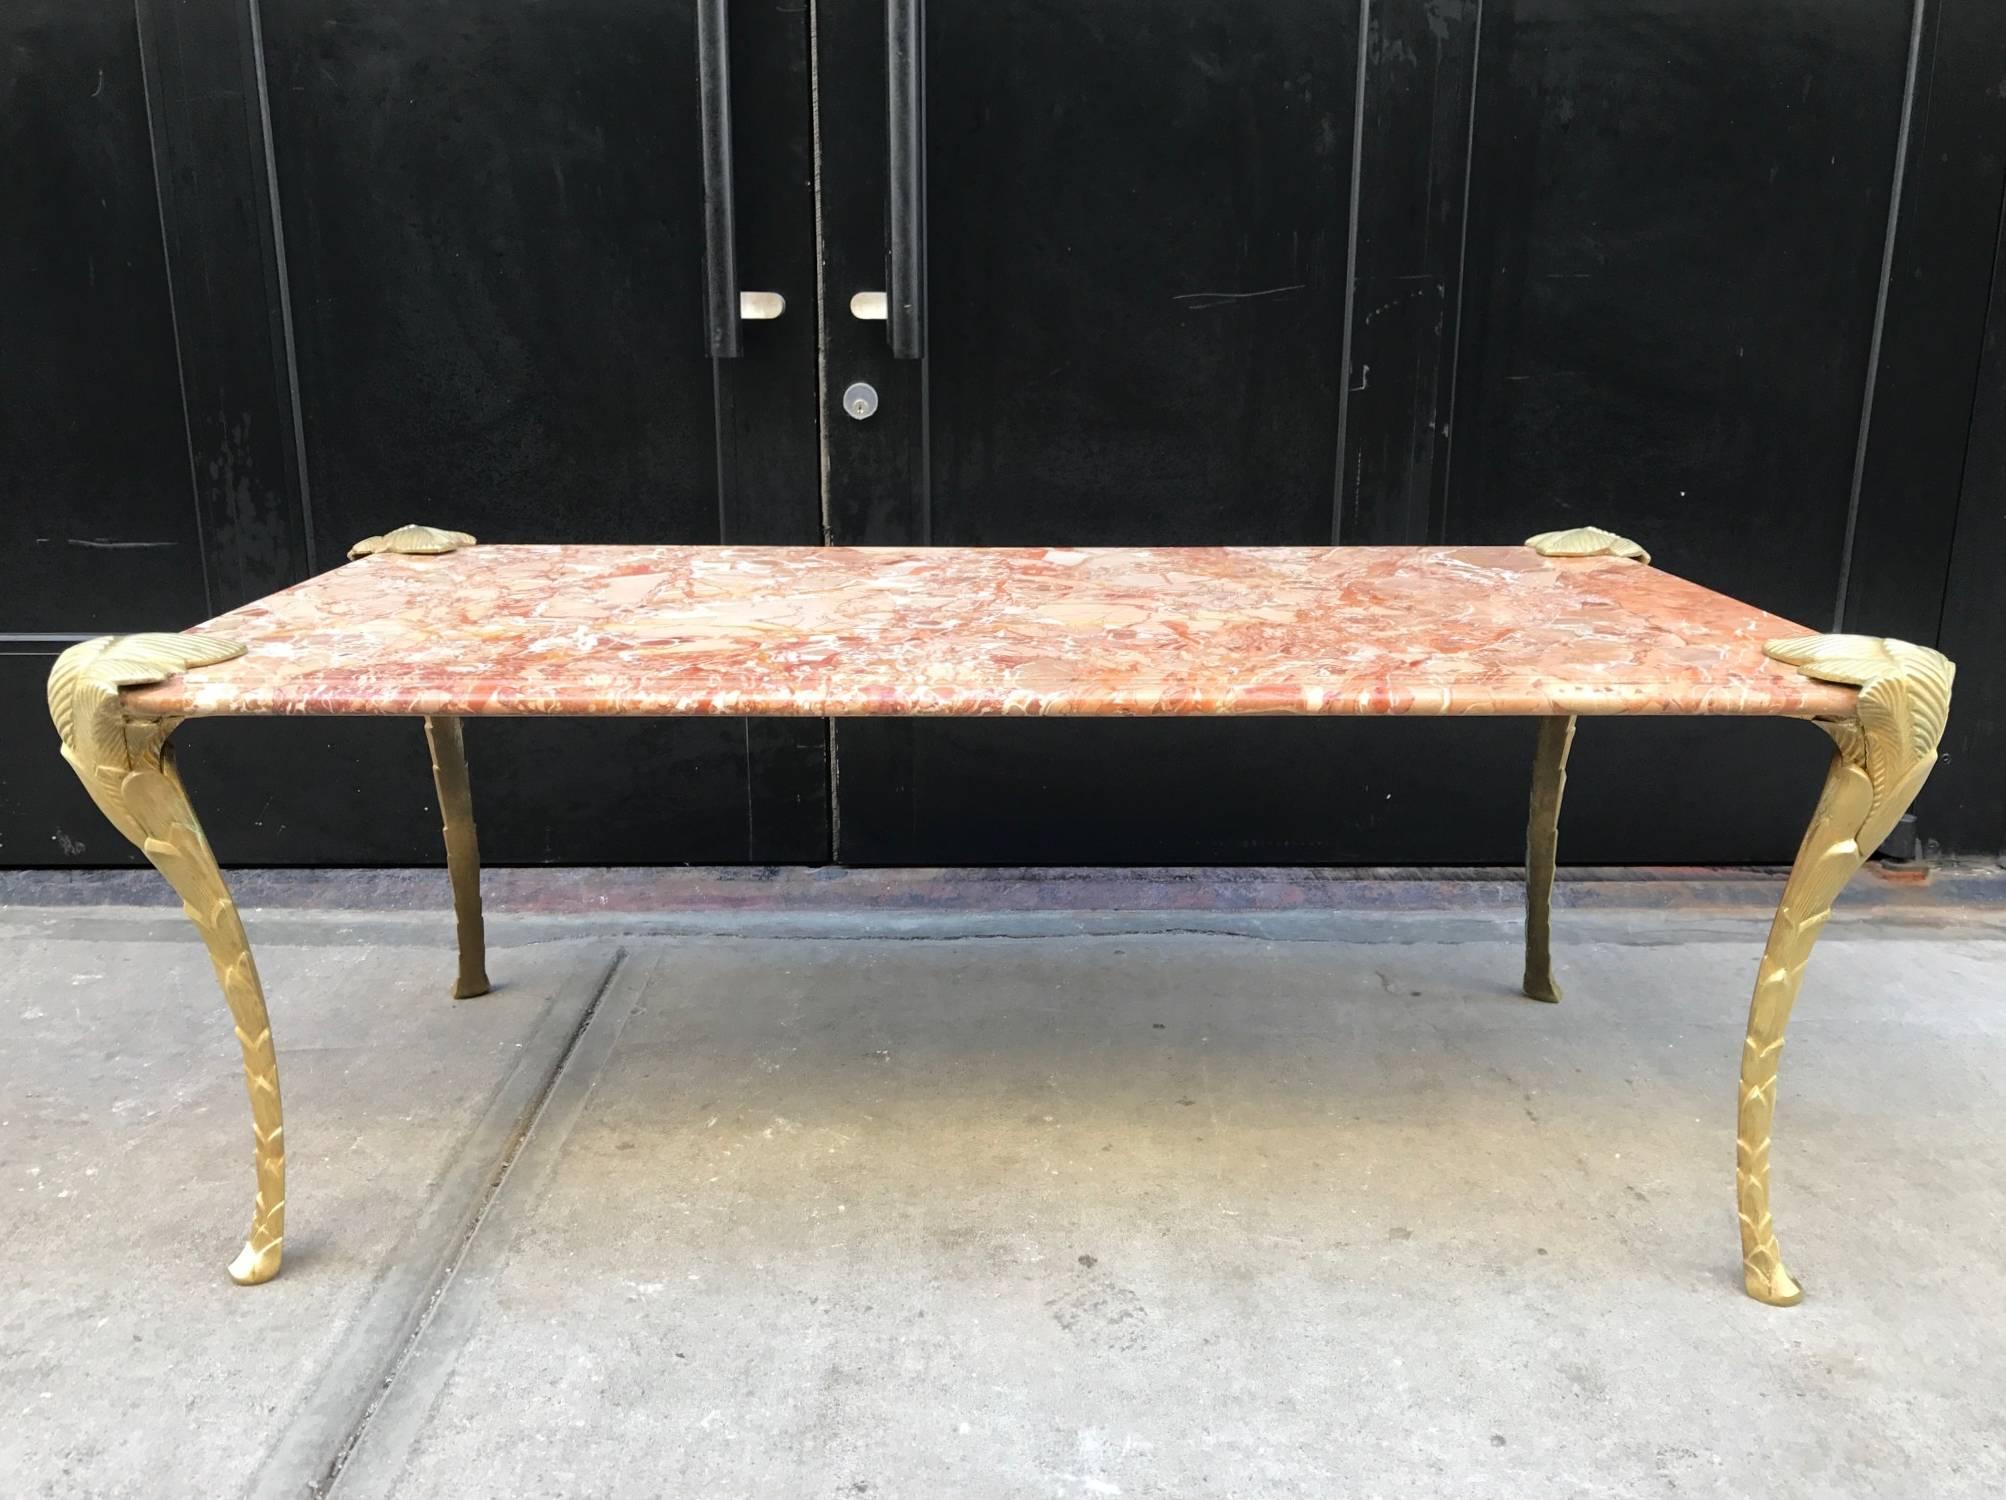 French bronze and marble coffee table. The table has a marble top with floral style bronze legs. Stamped made in France under one of the legs.